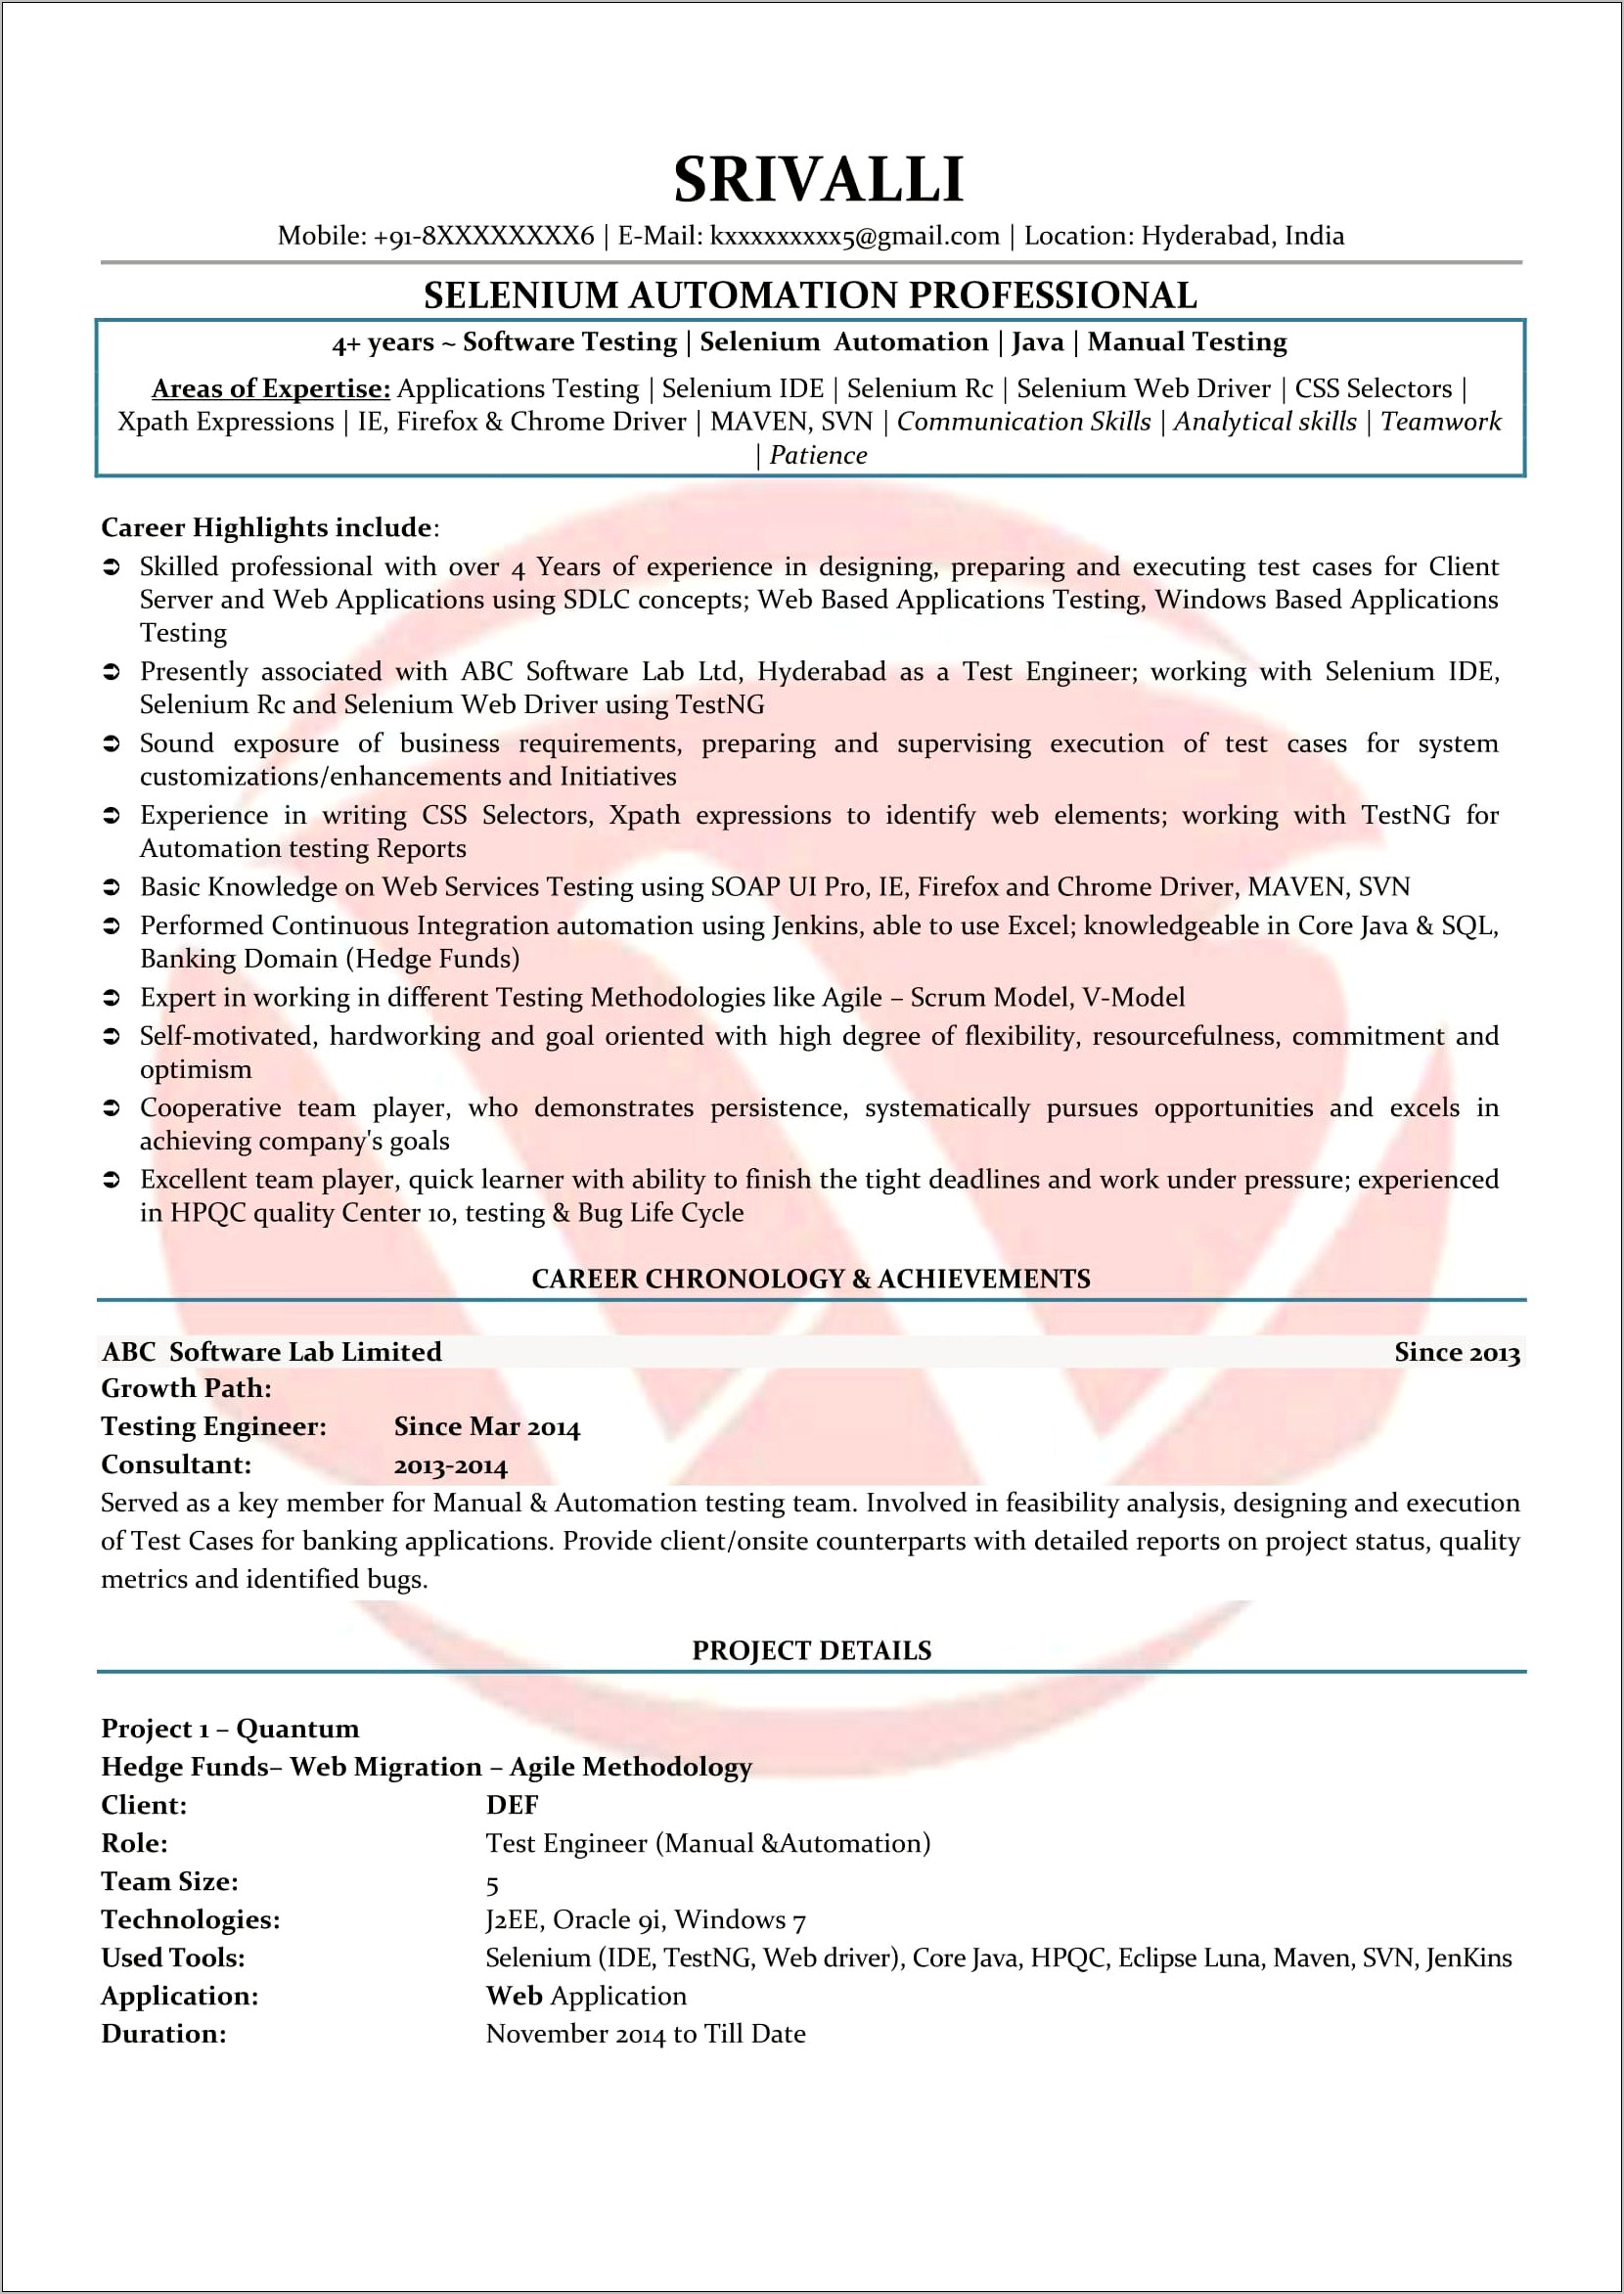 Java 2 Years Experience Resume Download